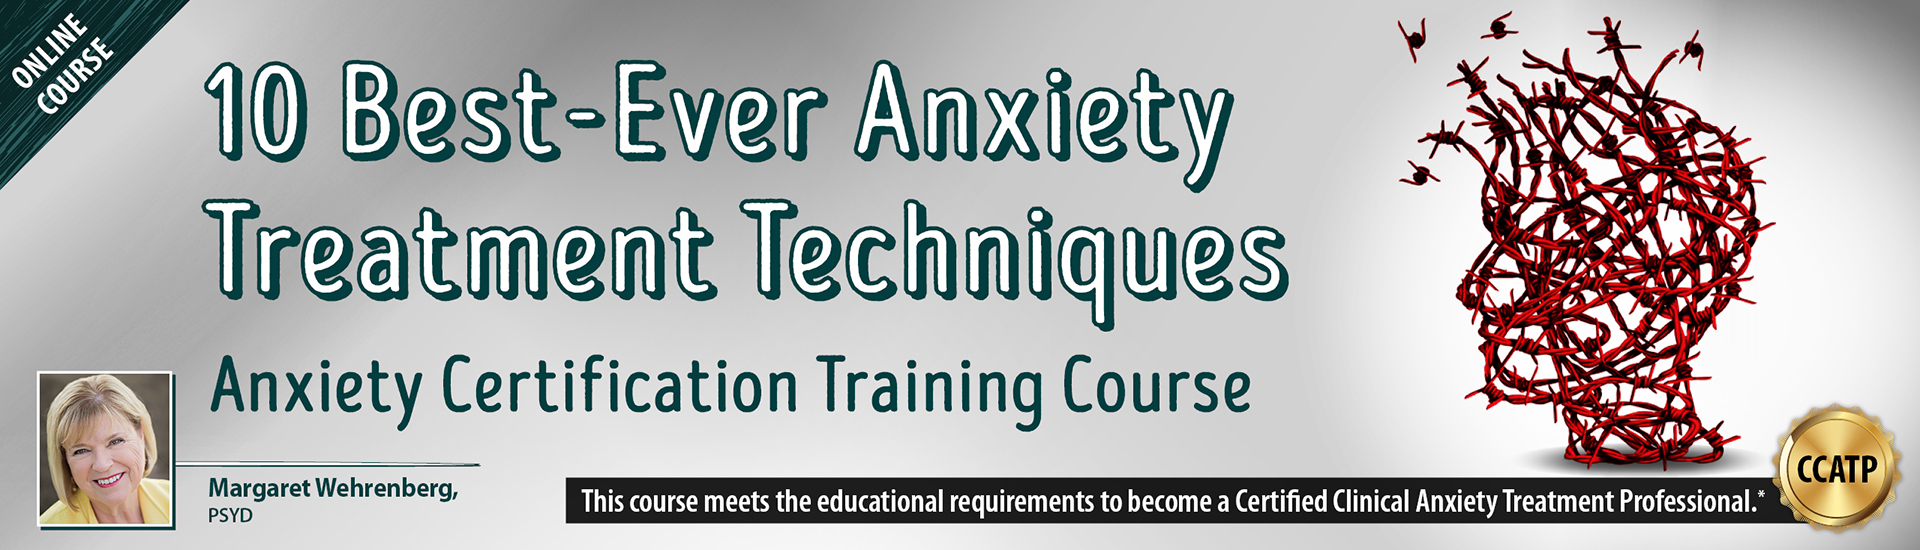 10 Best-Ever Anxiety Treatment Techniques: Anxiety Certification Training Course